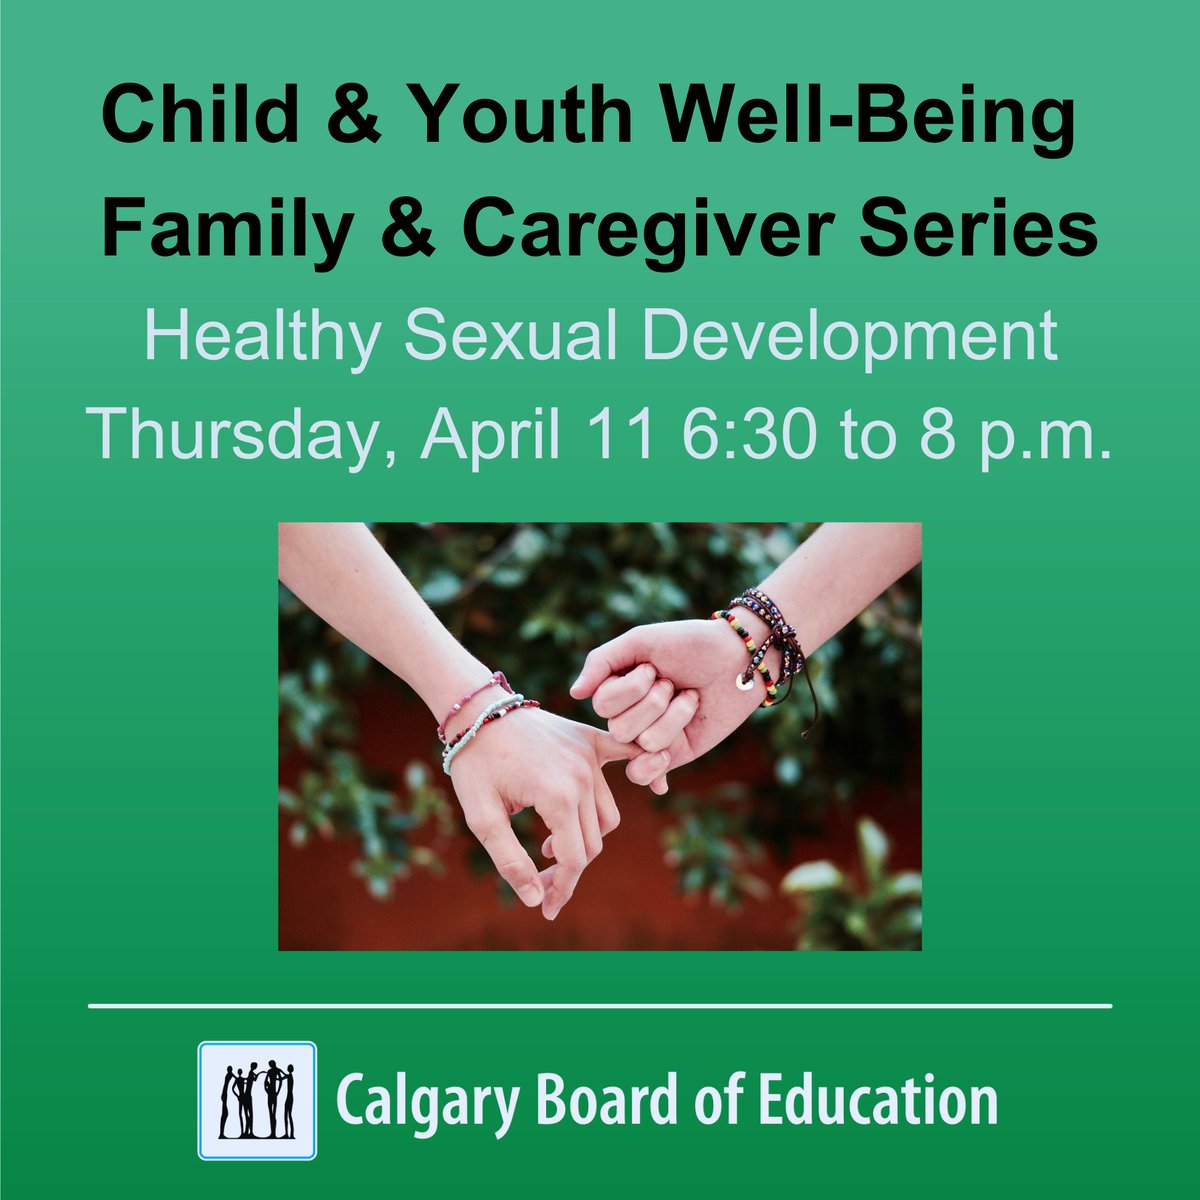 Join us on April 11, for the last information session in the Child & Youth Well-Being Family & Caregiver Series for the school year. Learn more and join the session: ow.ly/SZ2O50R8CYb #WeAreCBE